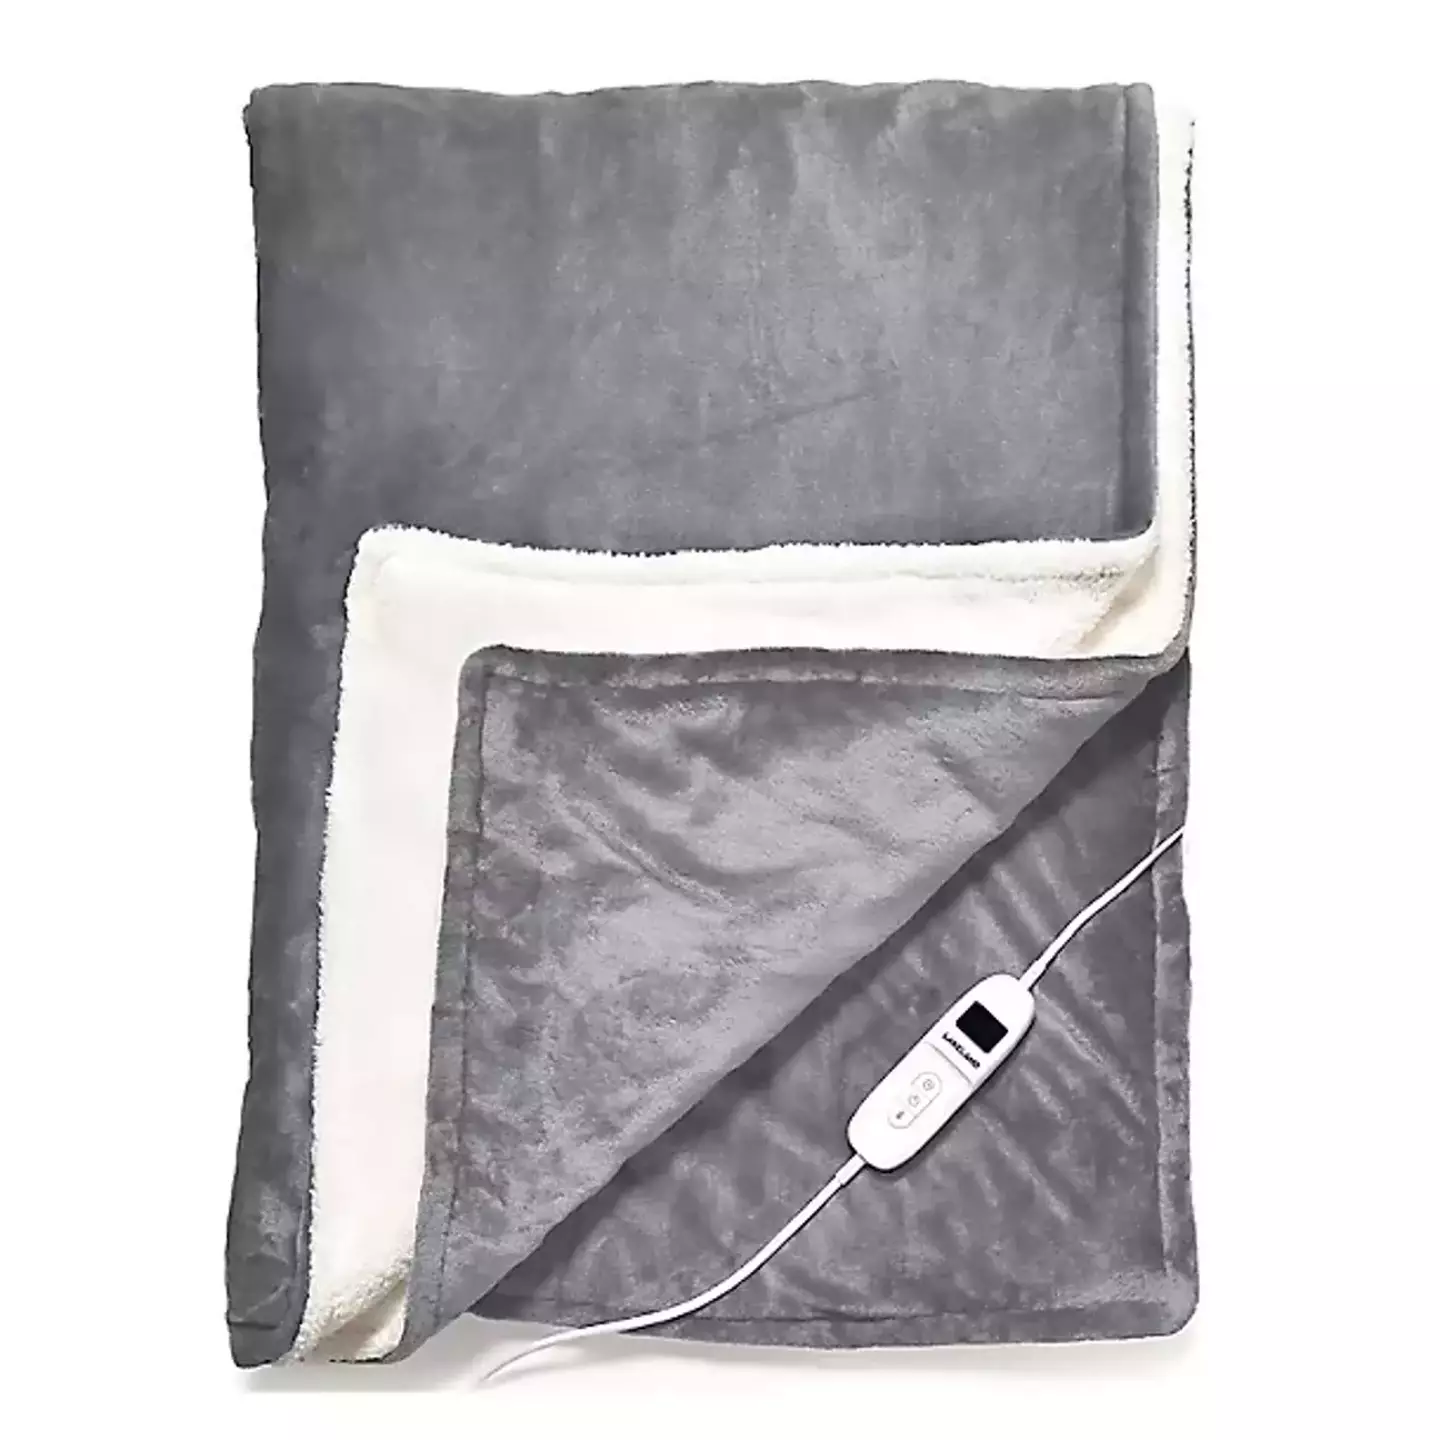 An electric blanket will help keep you warm this winter.